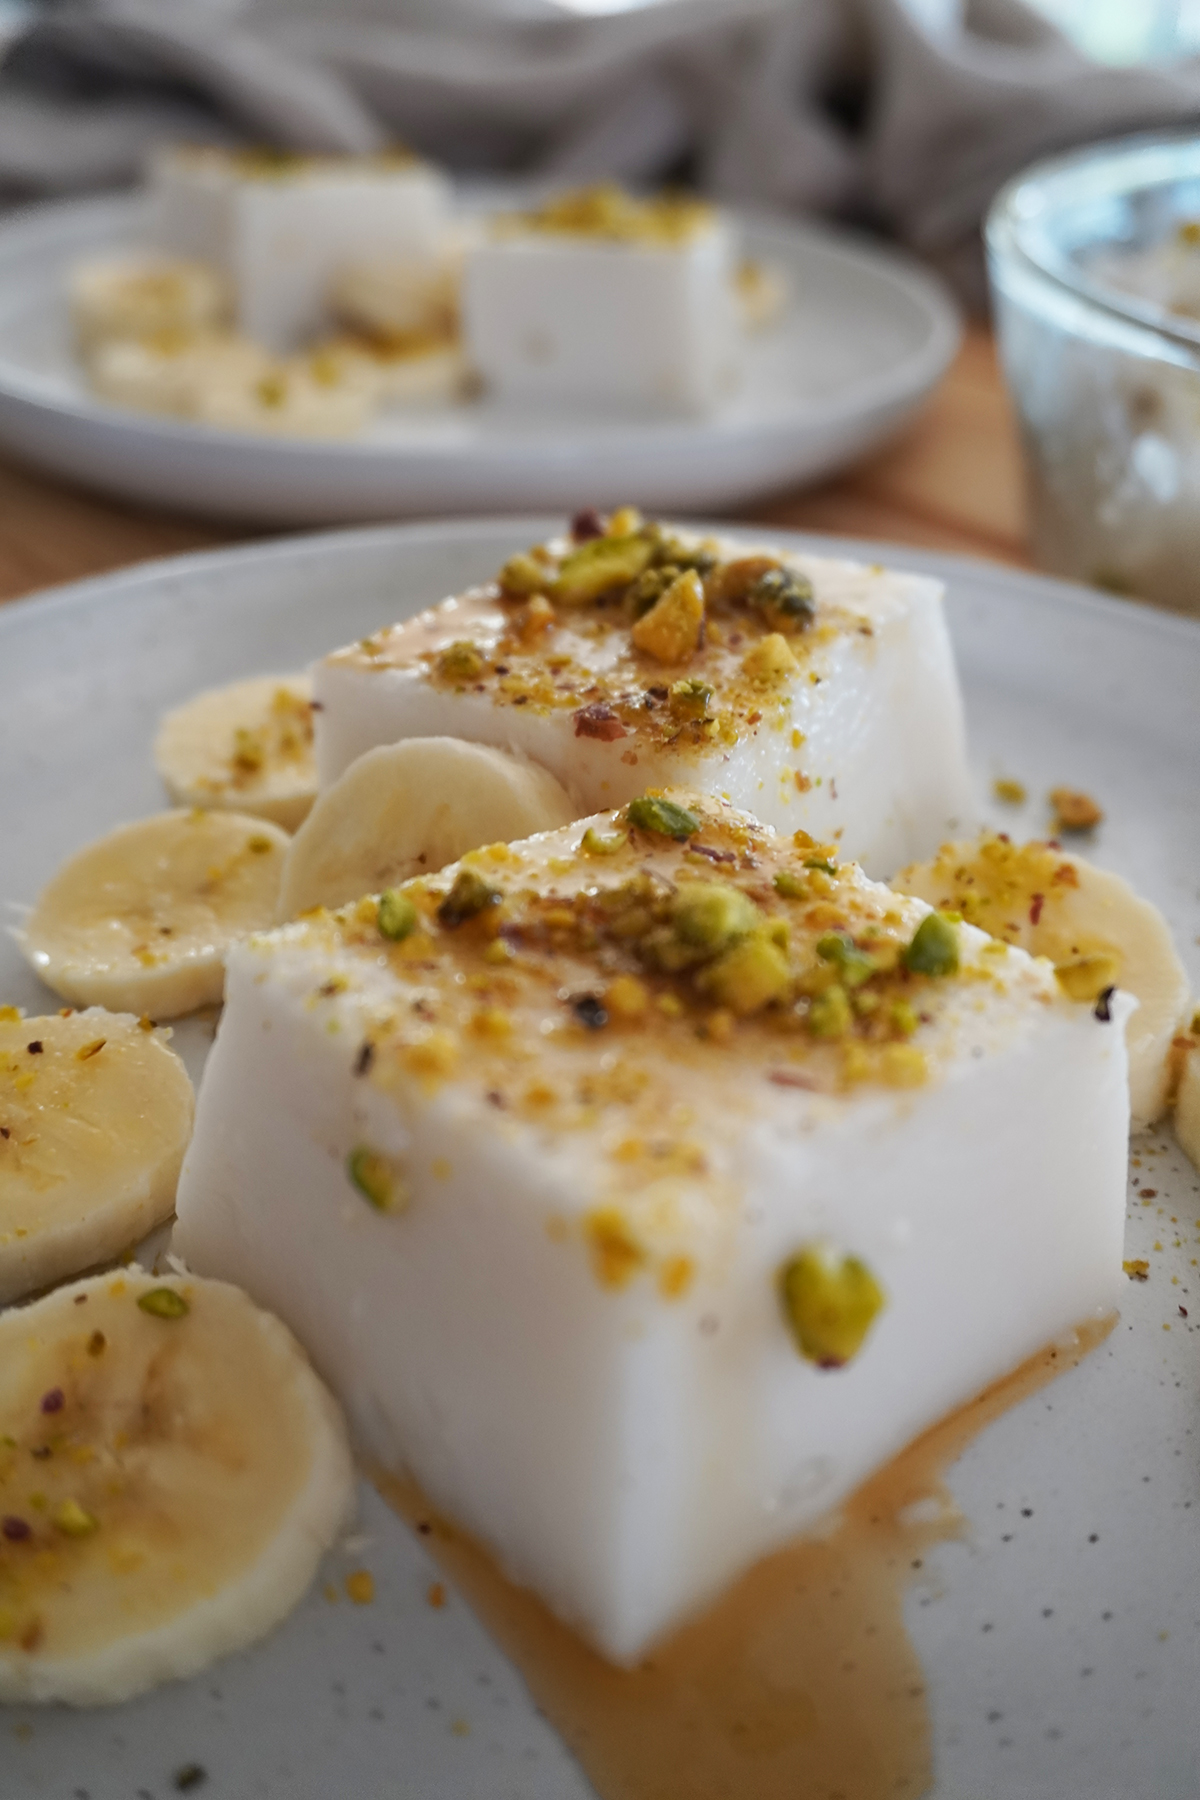 Haytaliyeh served with banana slices and a drizzle of maple syrup